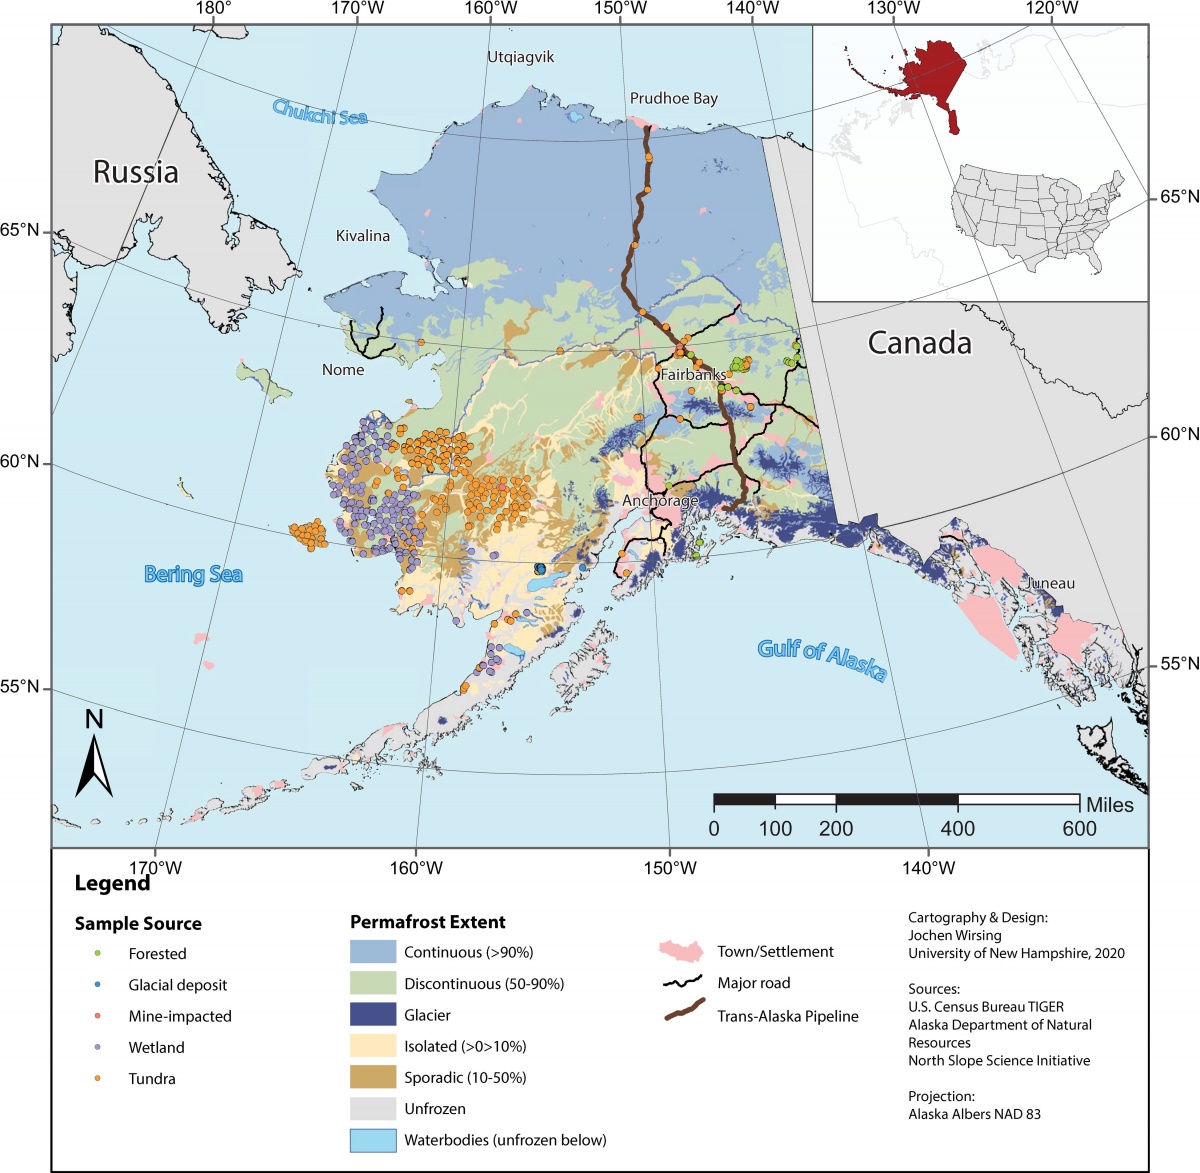 Map of Alaska showing research sites